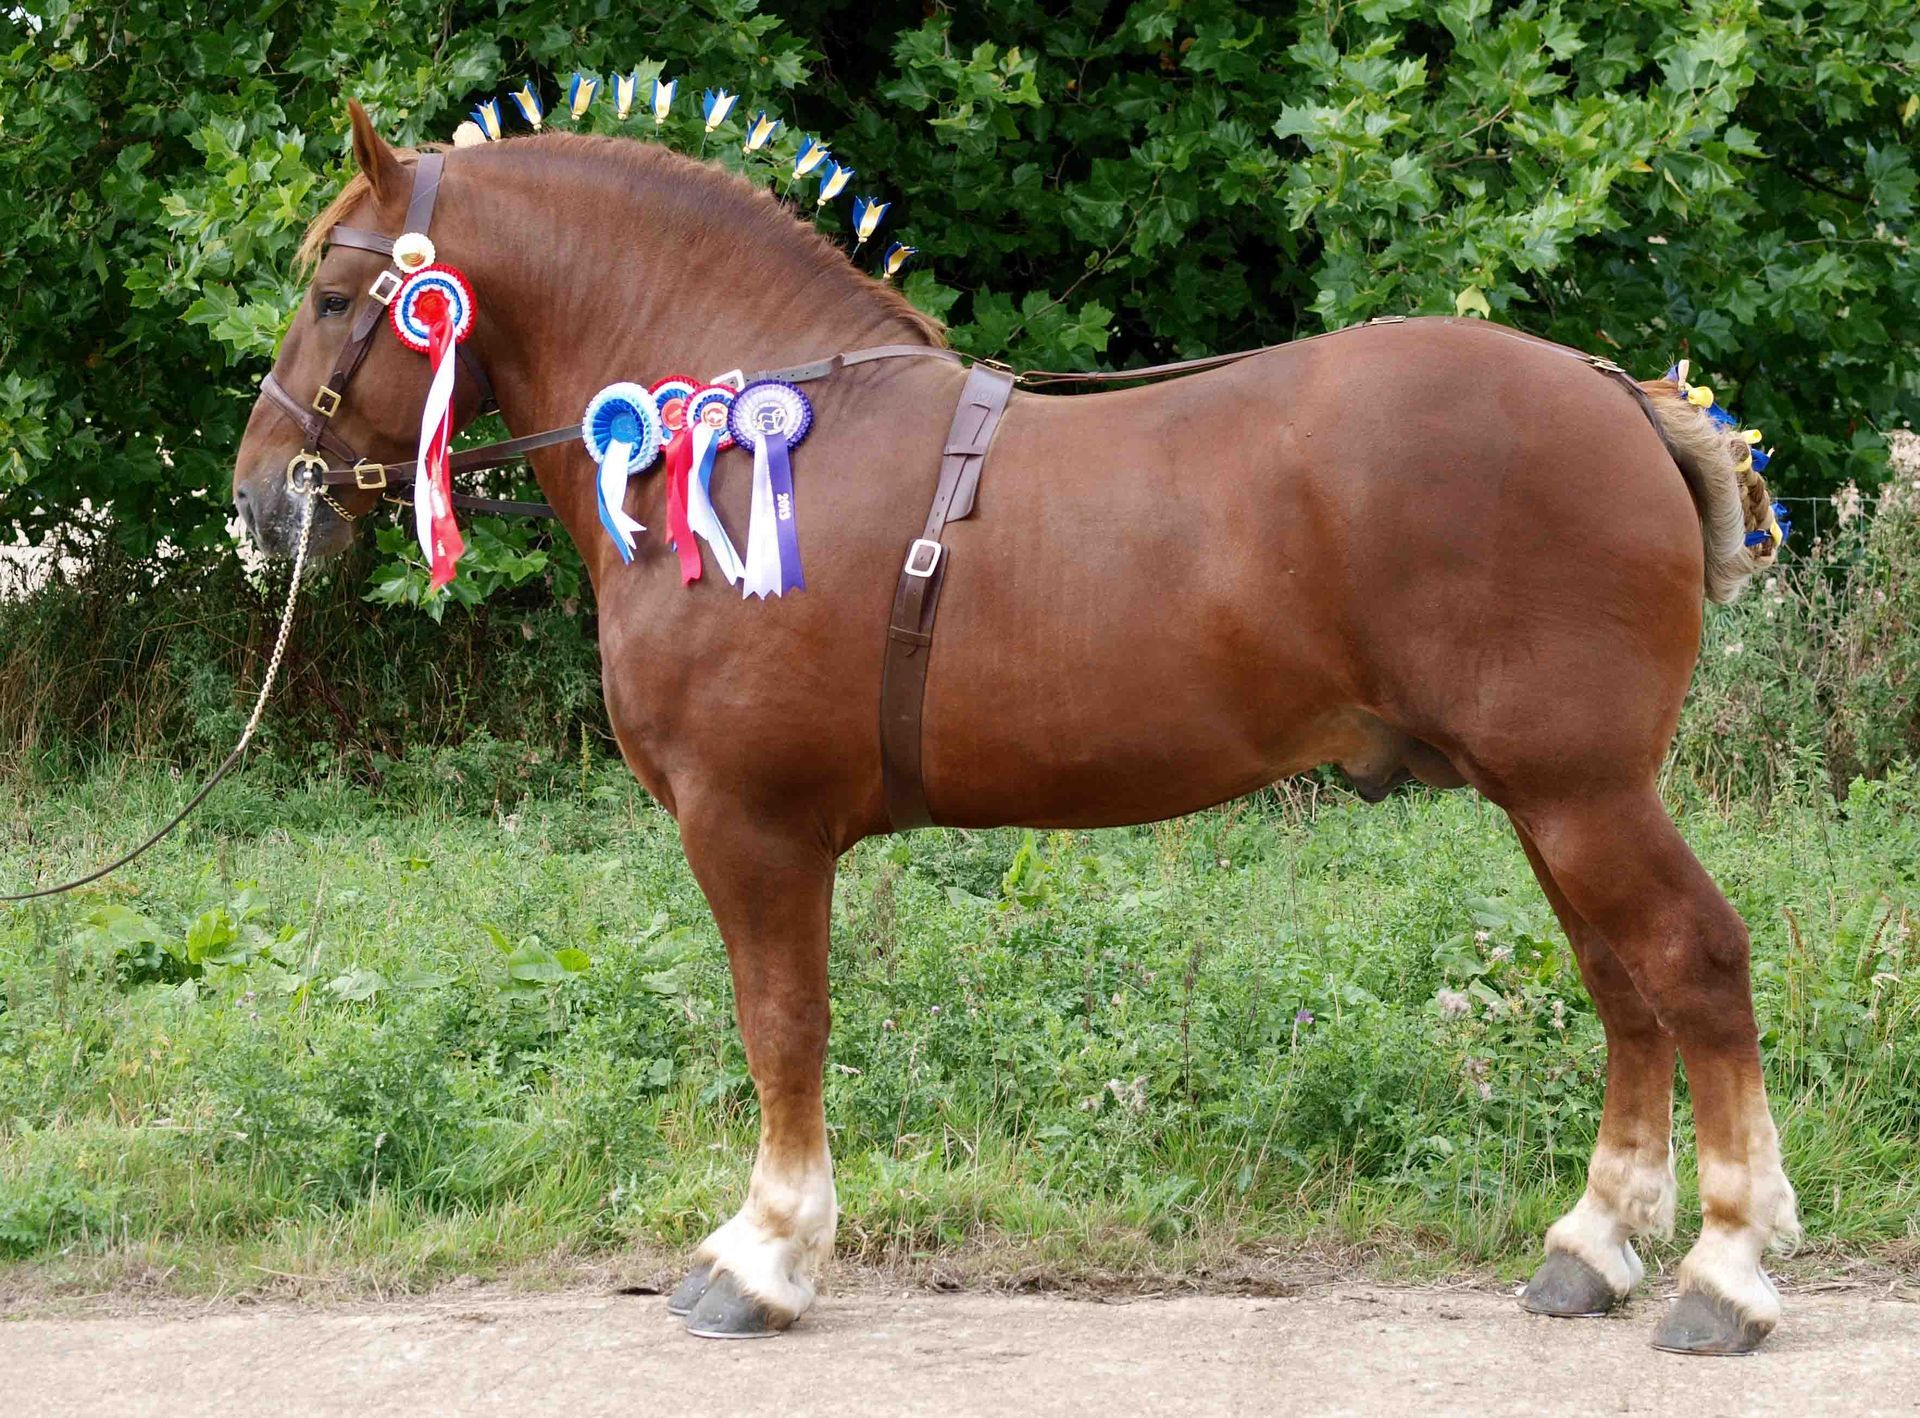 Stallion Achilles from the Suffolk Punch Trust charity in a horse show